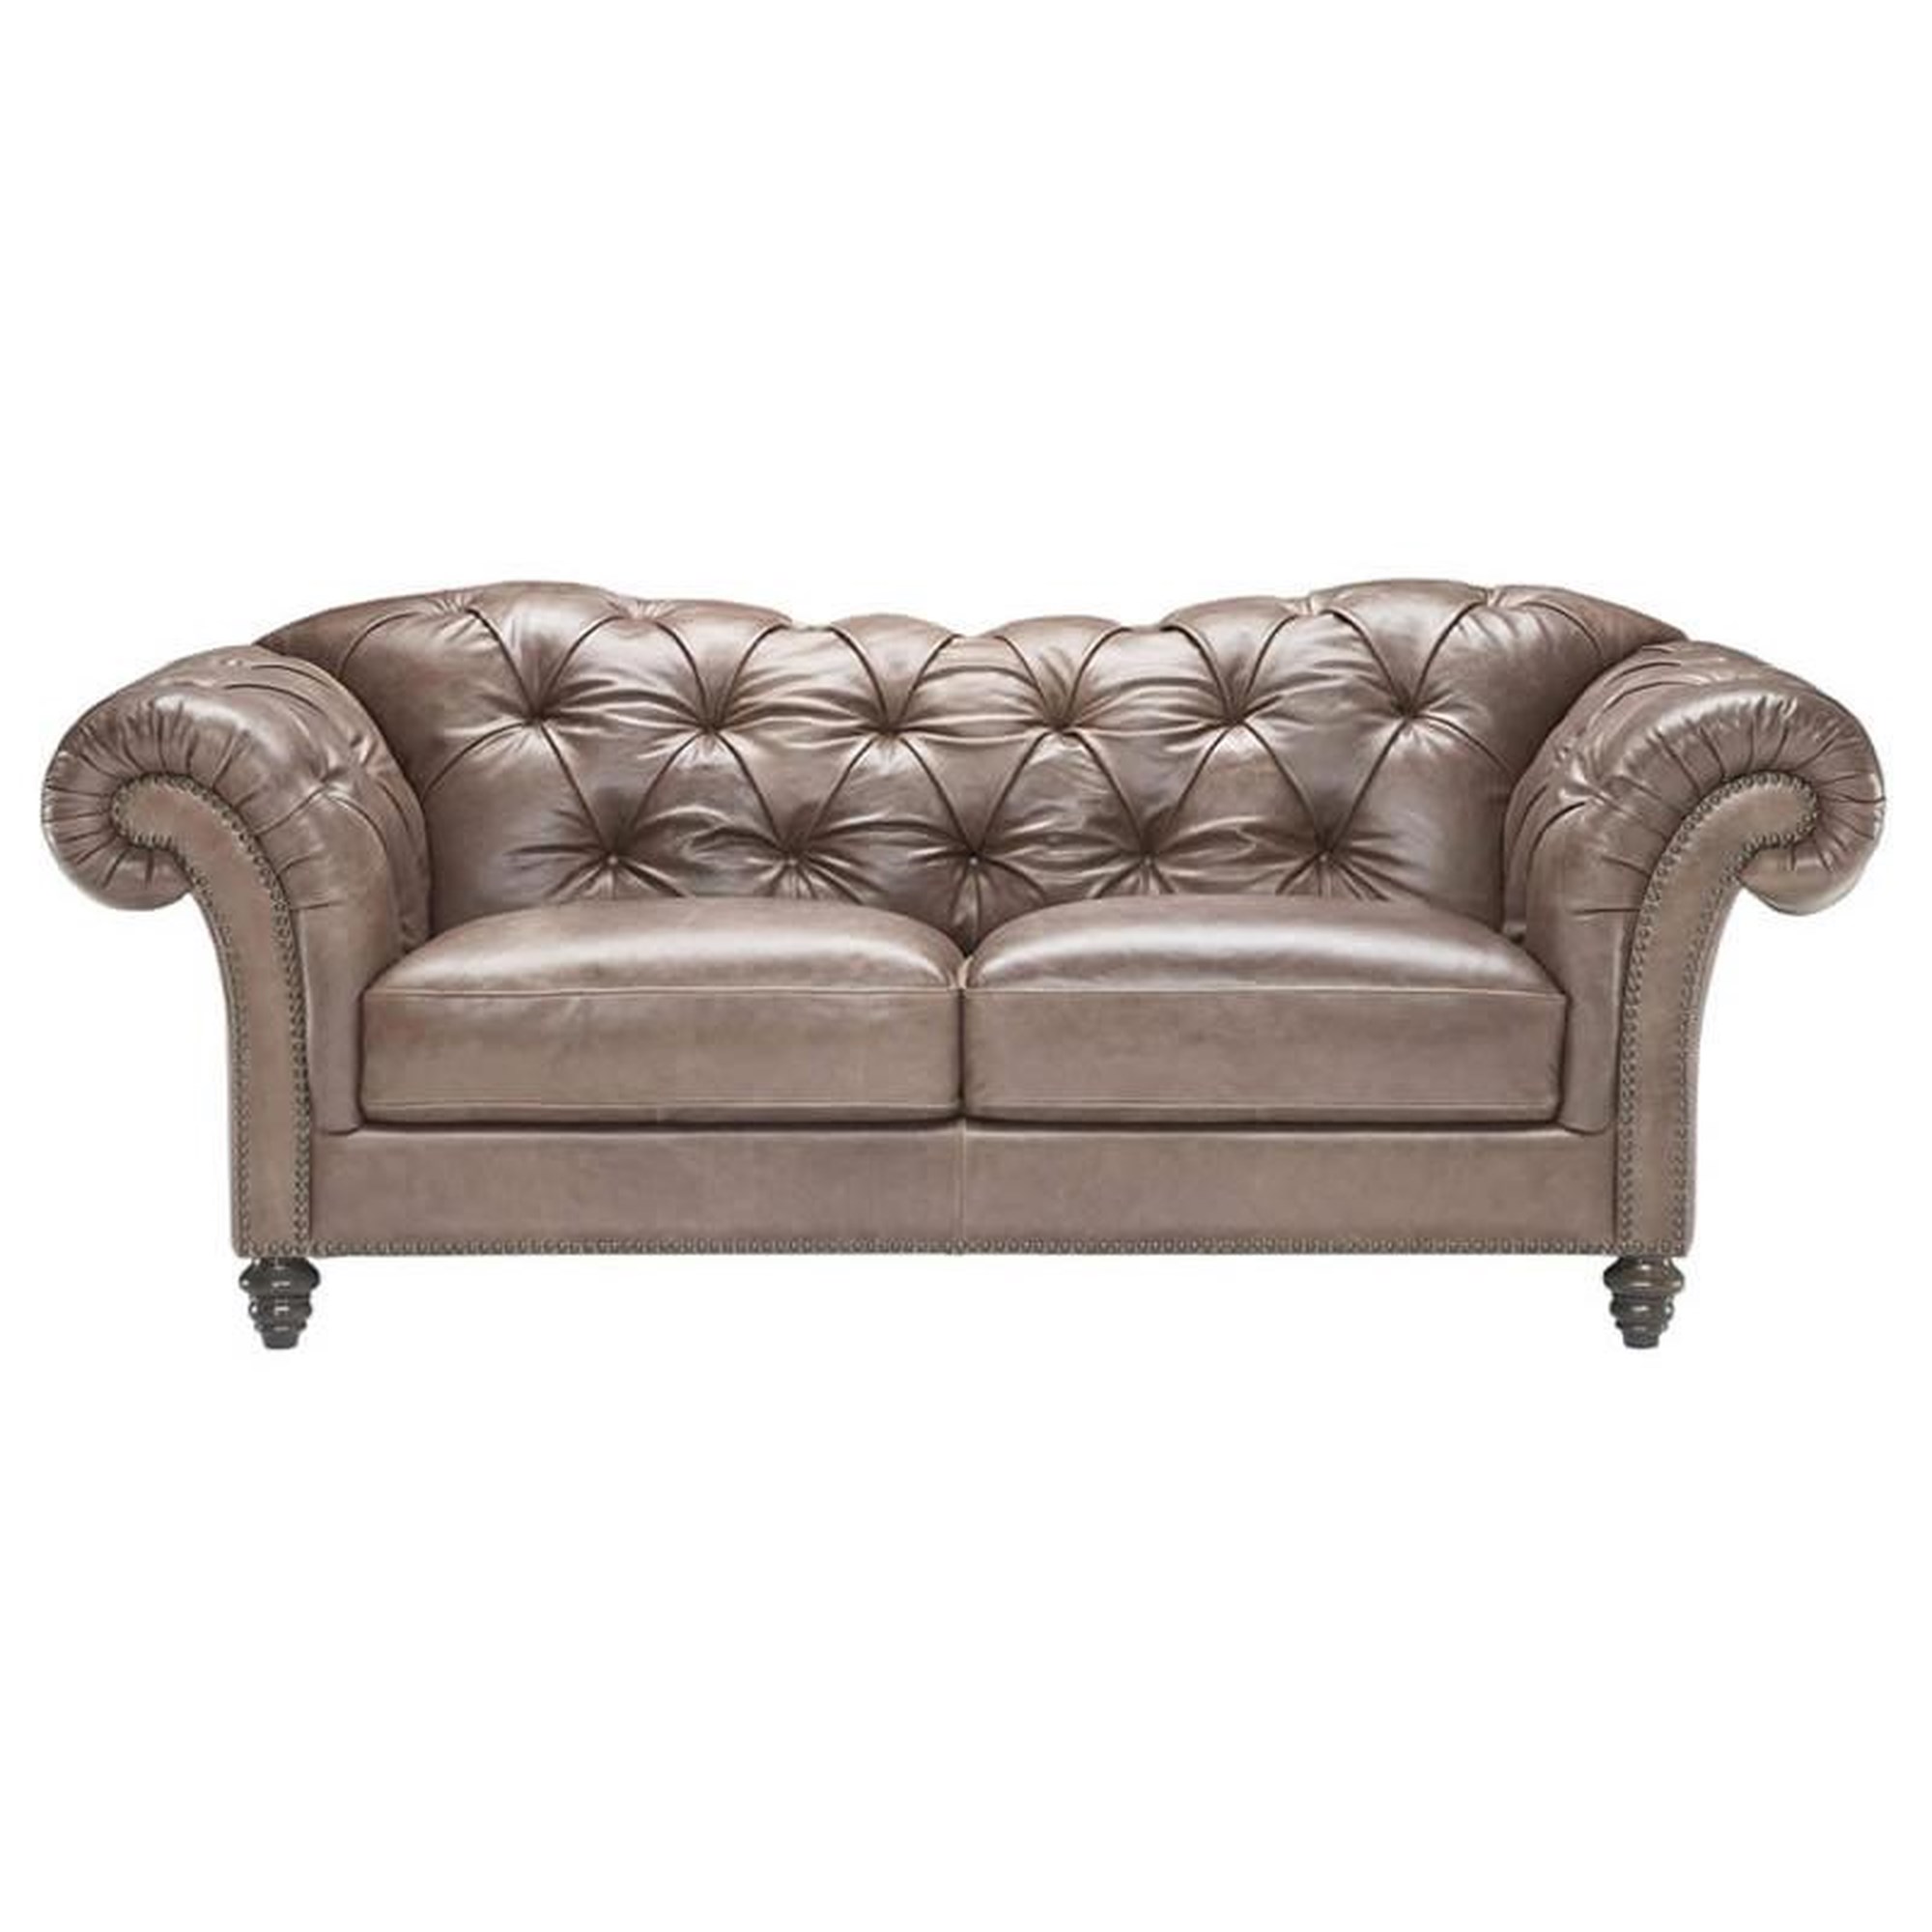 Natuzzi Editions A436 A436-239 Traditional Chesterfield Leather Sofa ...